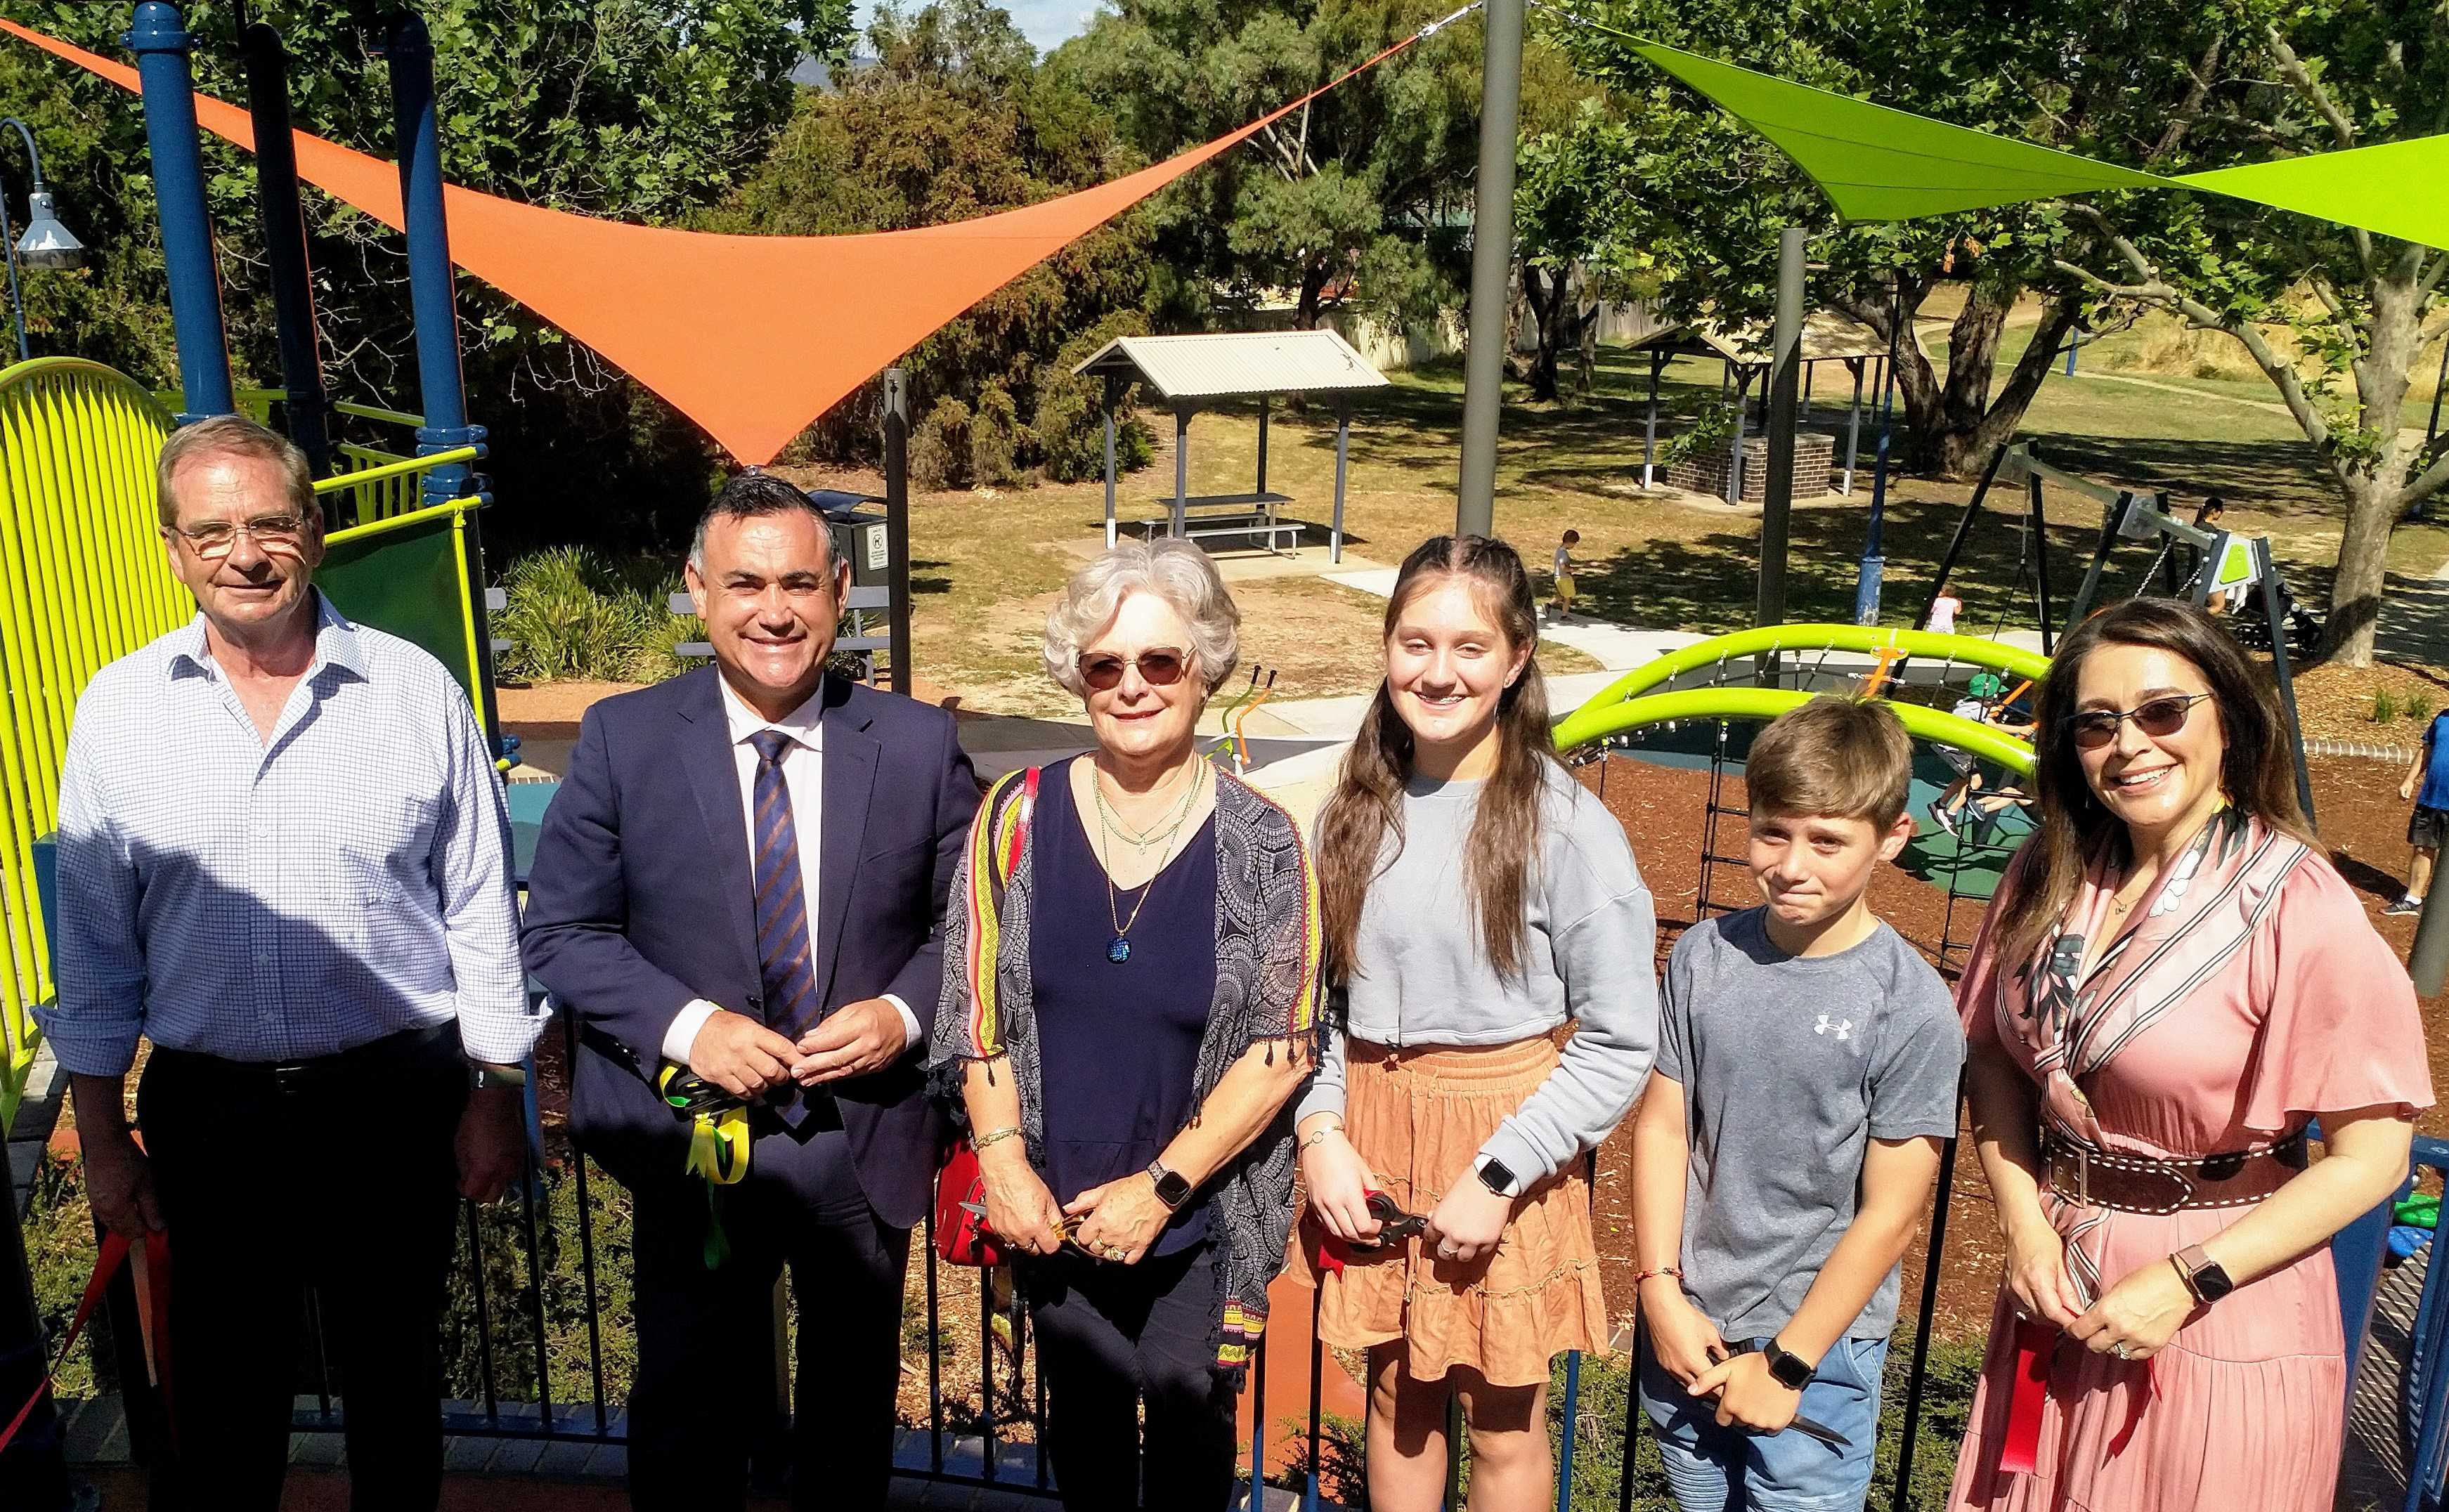 Hope springs eternal with inclusive additions to Queanbeyan playground